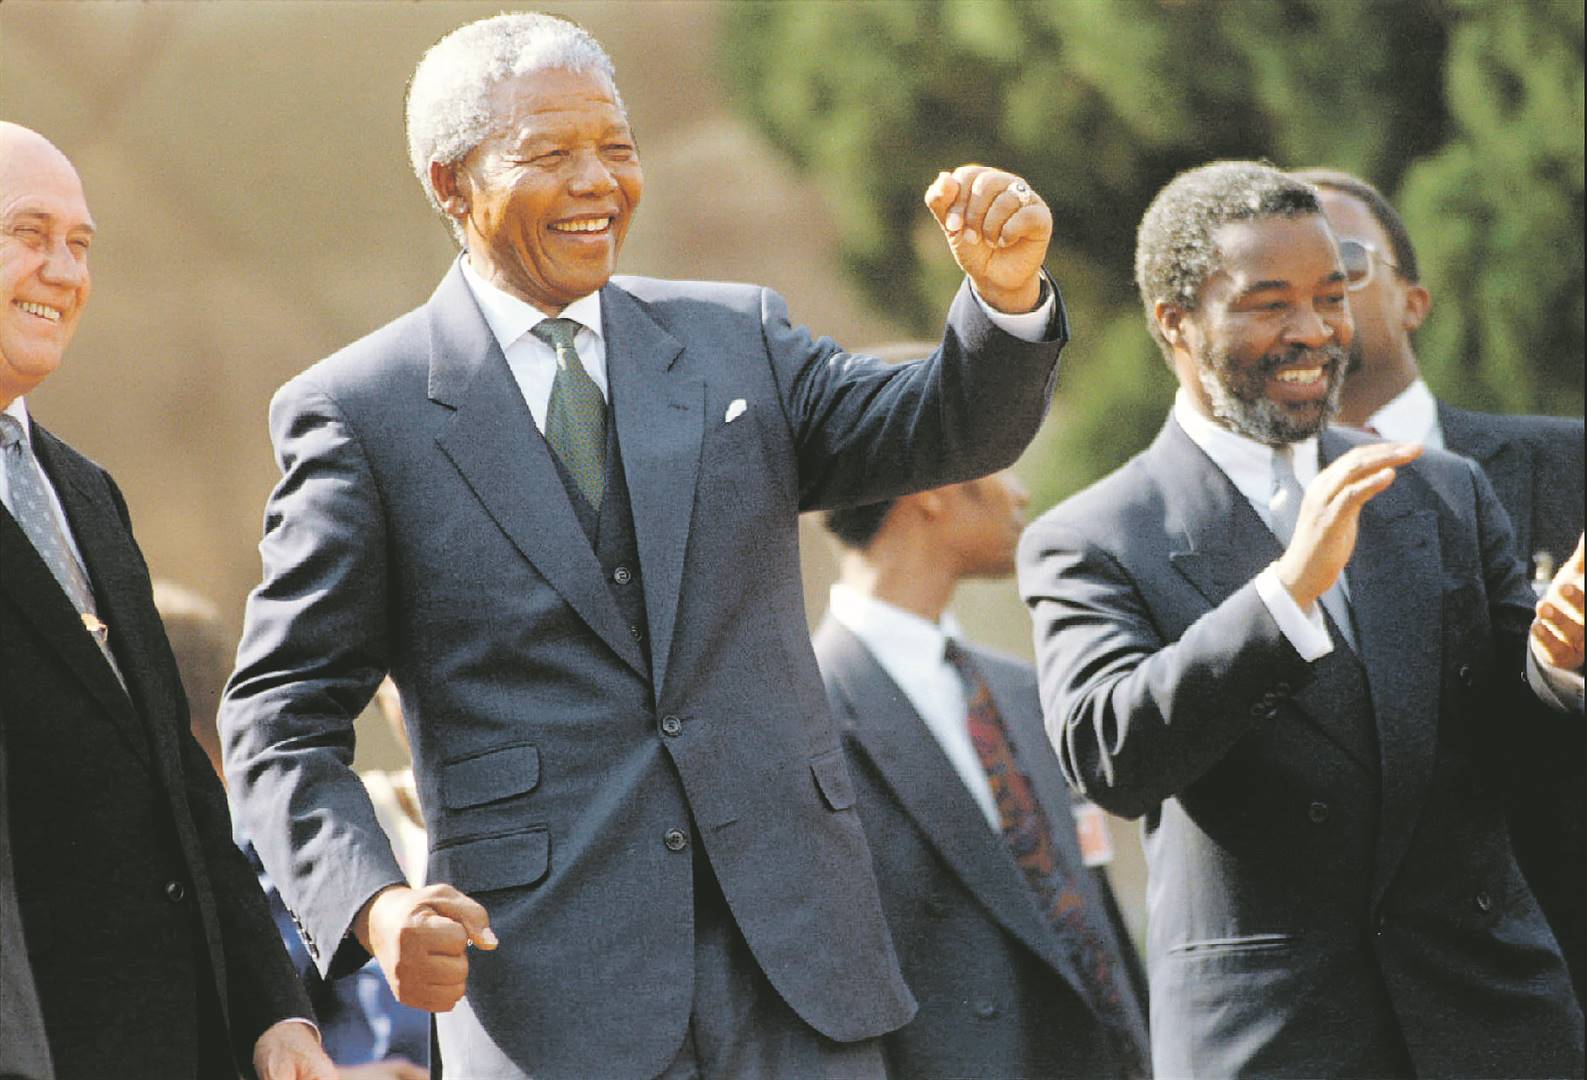 Former presidents FW de Klerk, Nelson Mandela and Thabo Mbeki at the Union Buildings in Pretoria shortly before Mandela’s inauguration in 1994 as the first democratically elected president of SA 